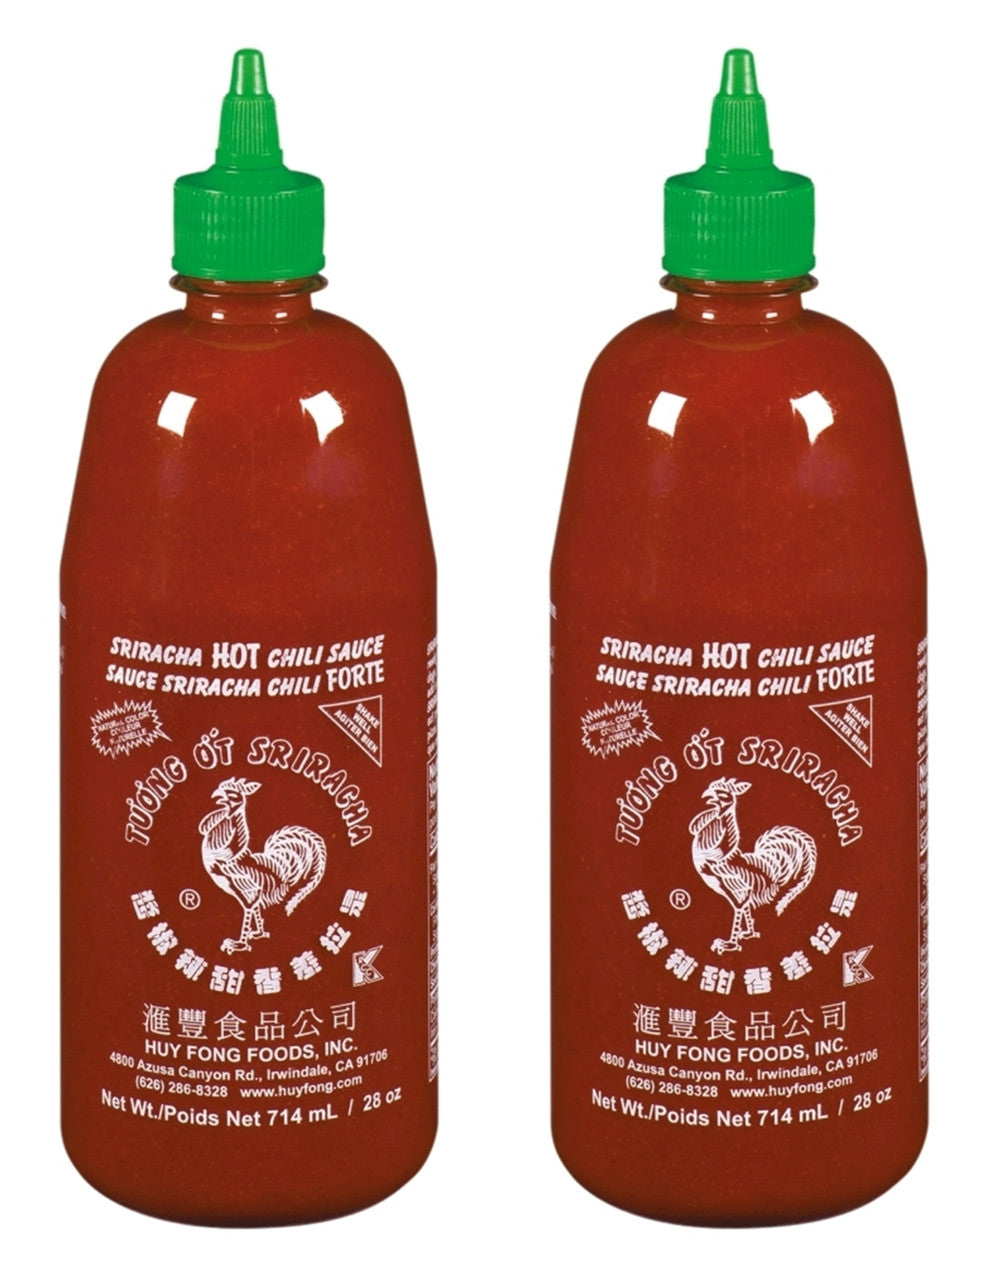 Huy Fong - Sriracha Hot Chili Sauce, 714ml/25 oz., 2pk {Imported from Canada}